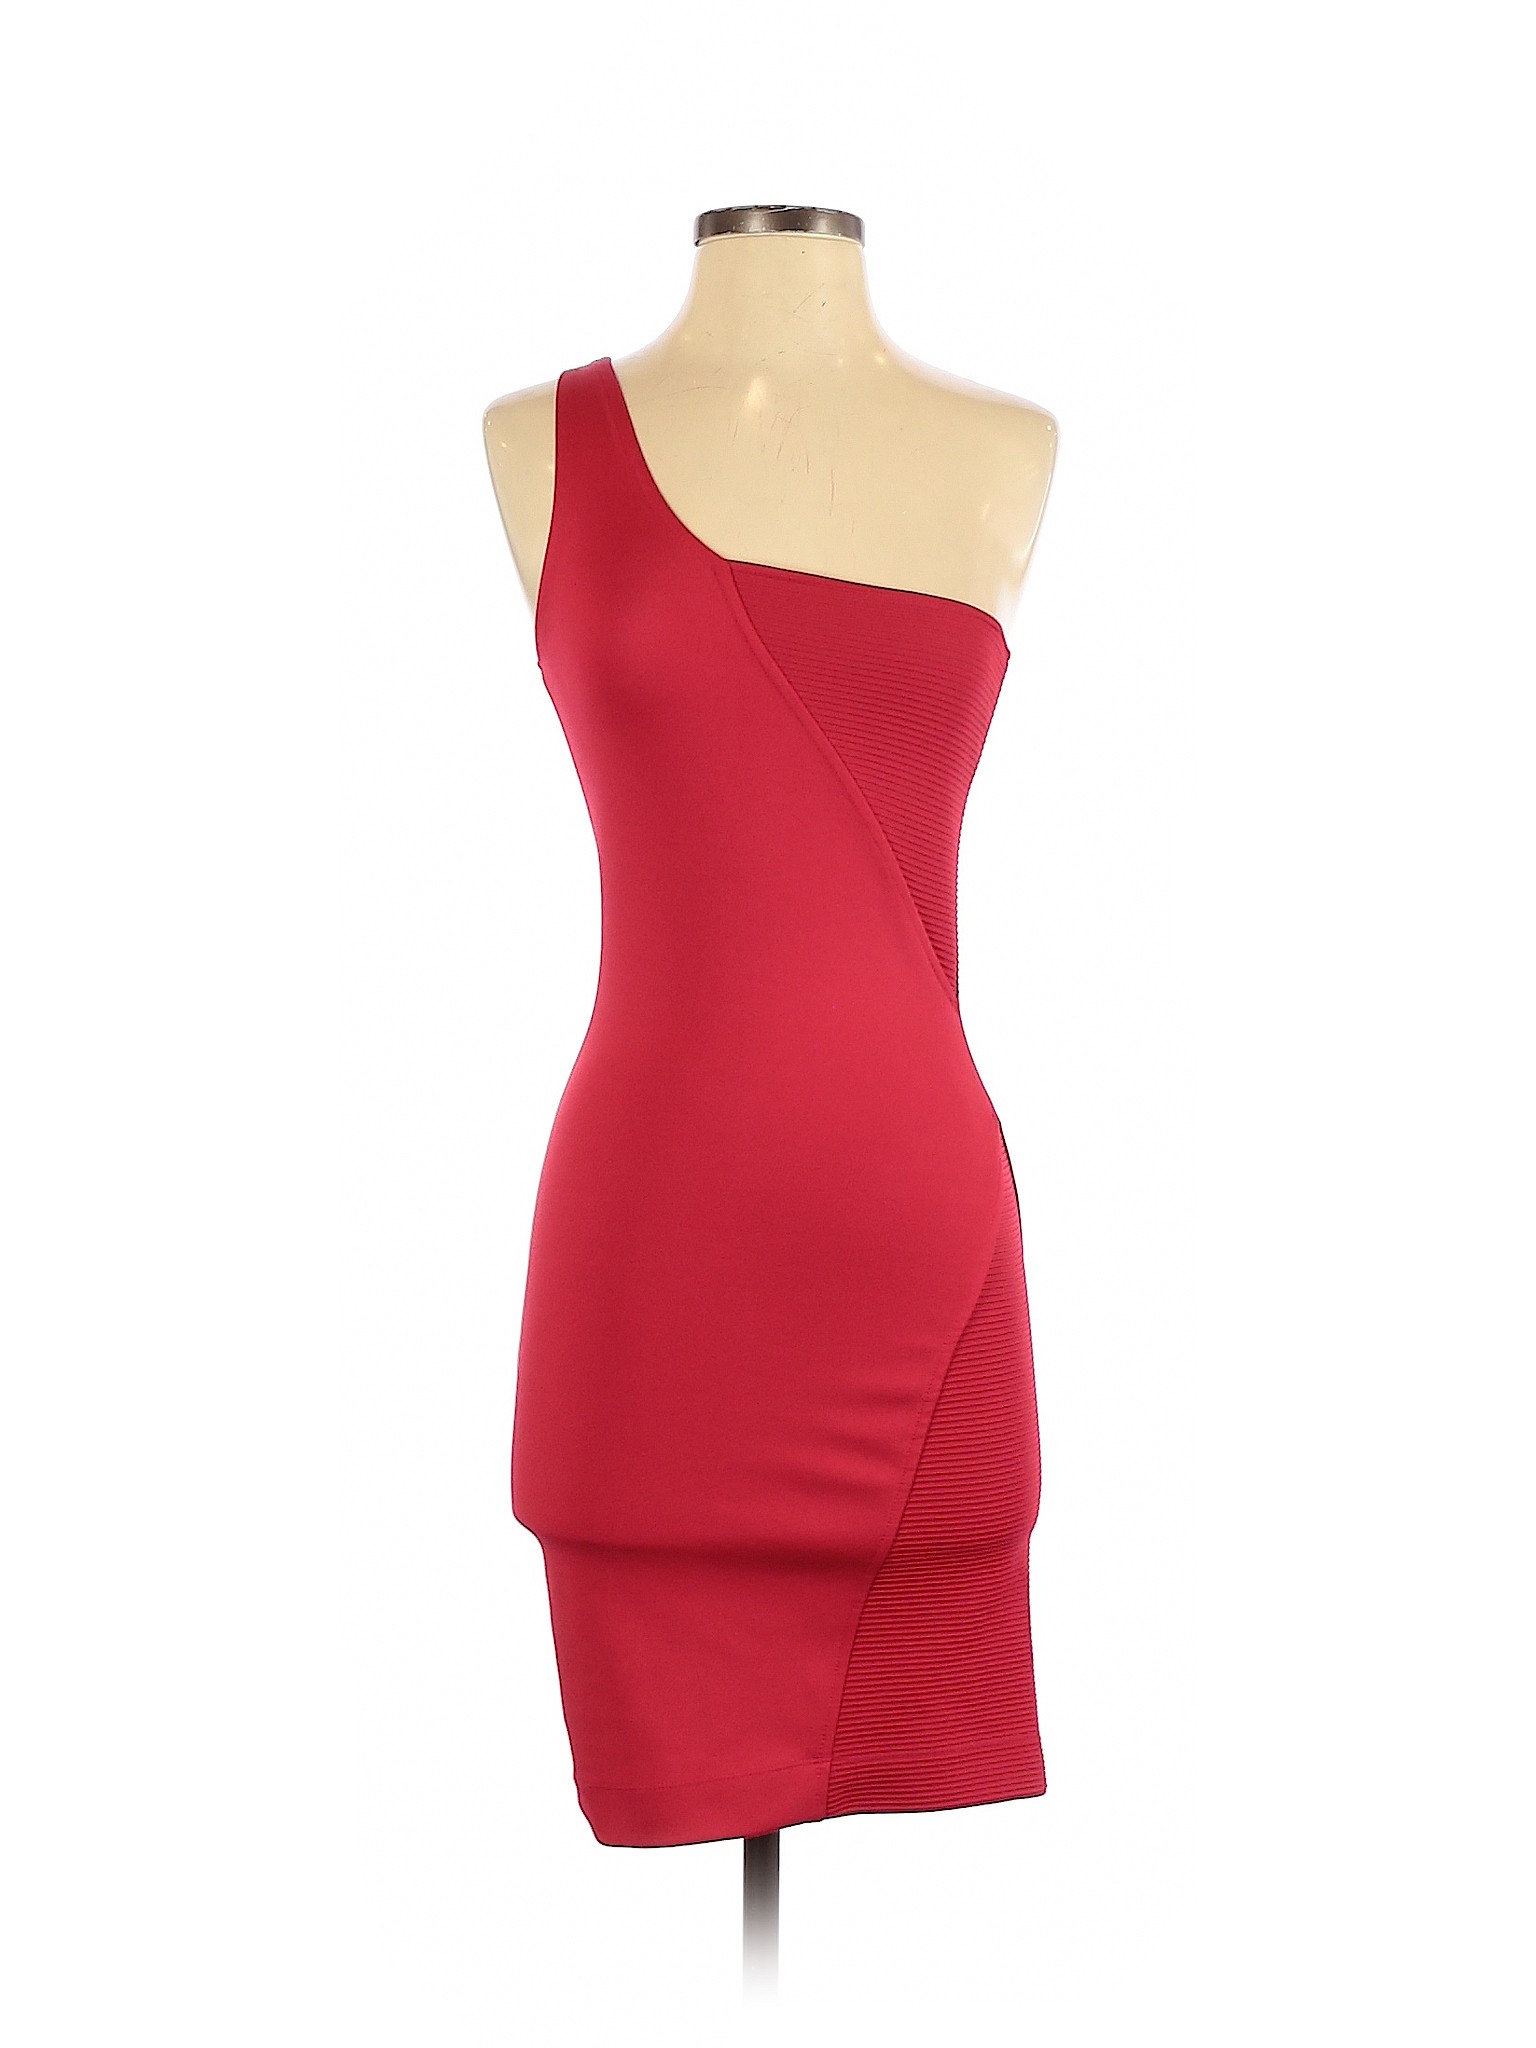 French Connection Women Red Cocktail Dress 4 | eBay